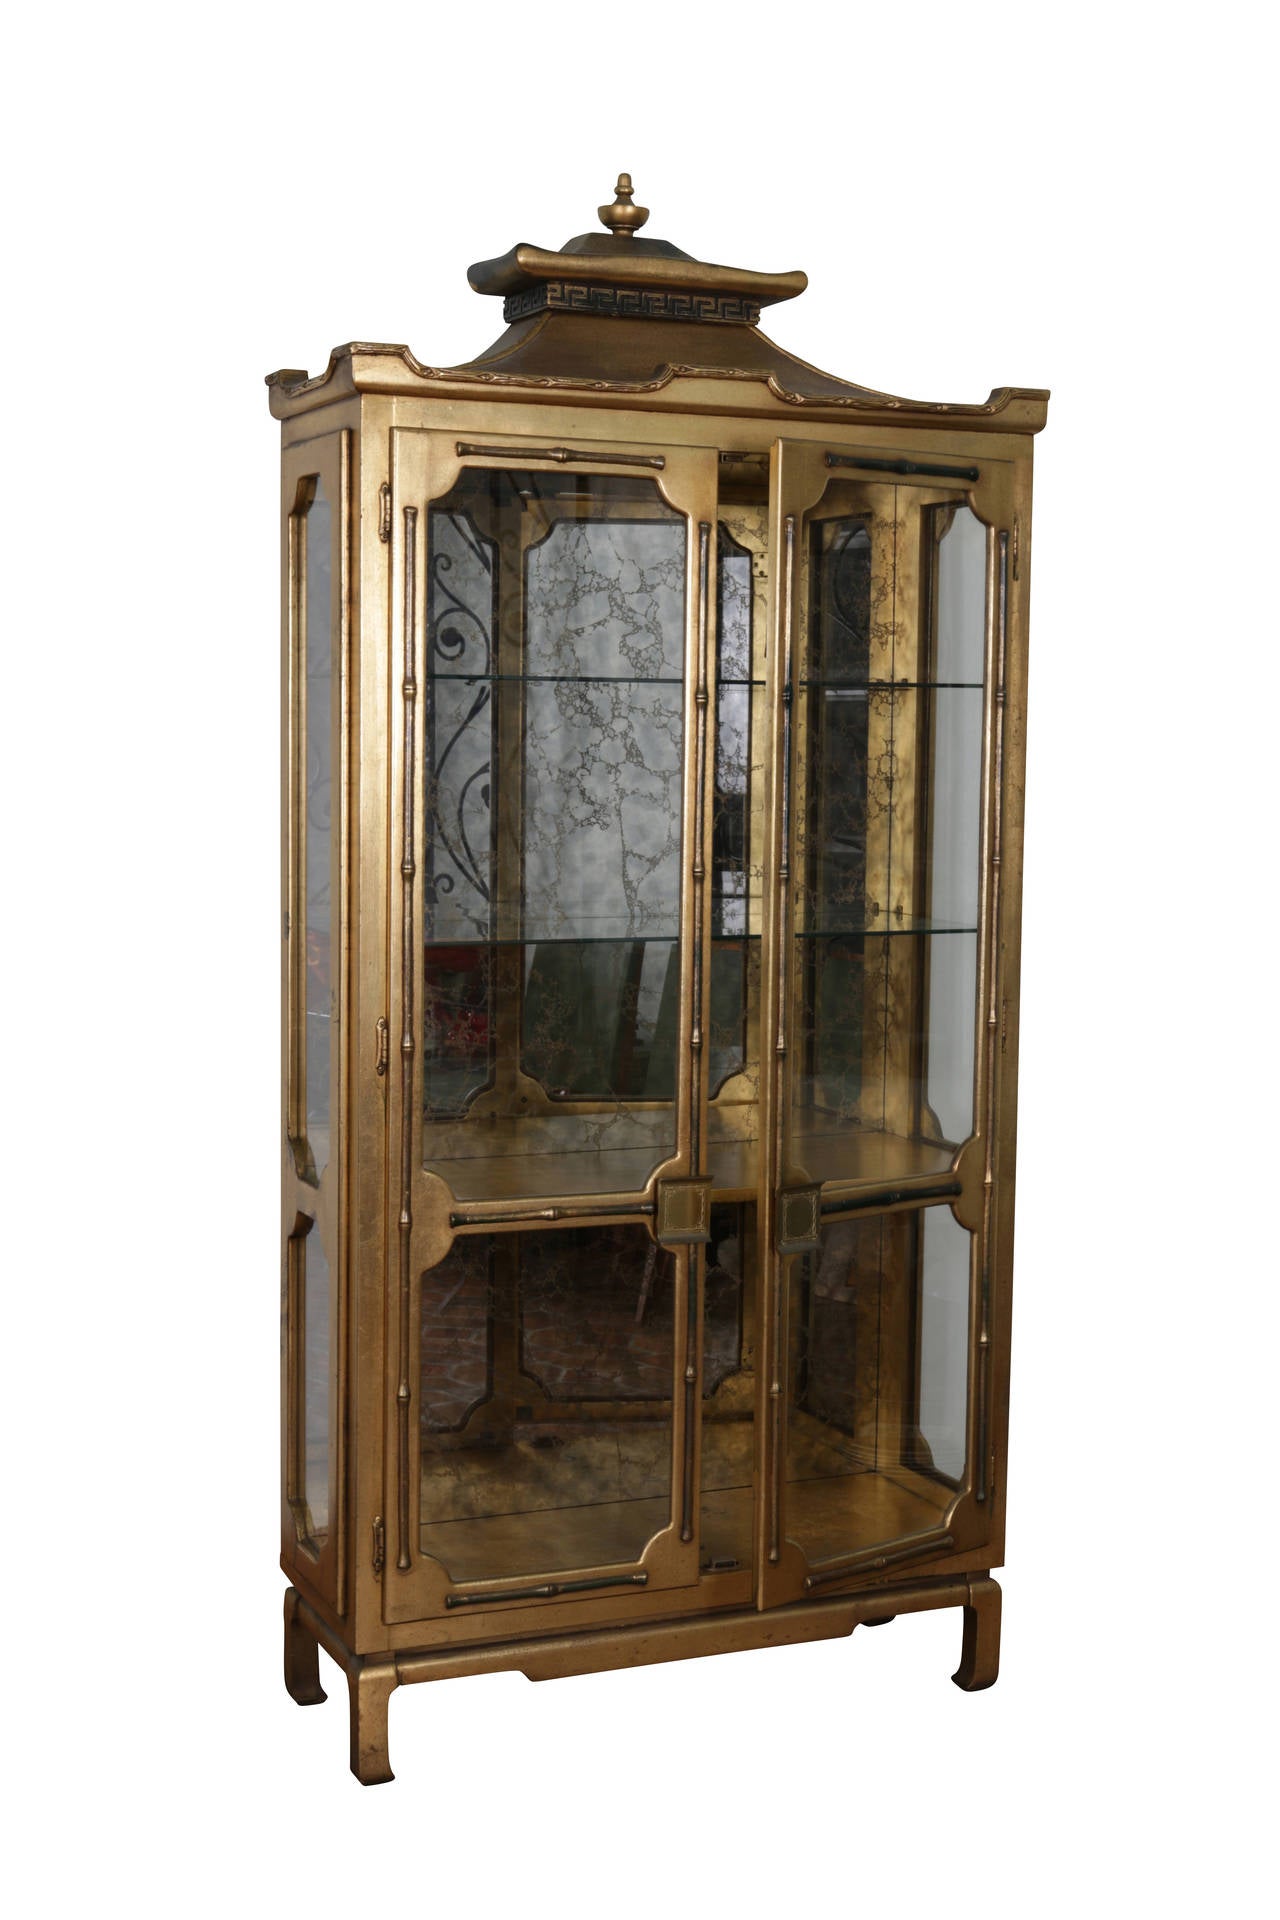 American Gilded Pagoda Display Cabinet in the Manner of James Mont